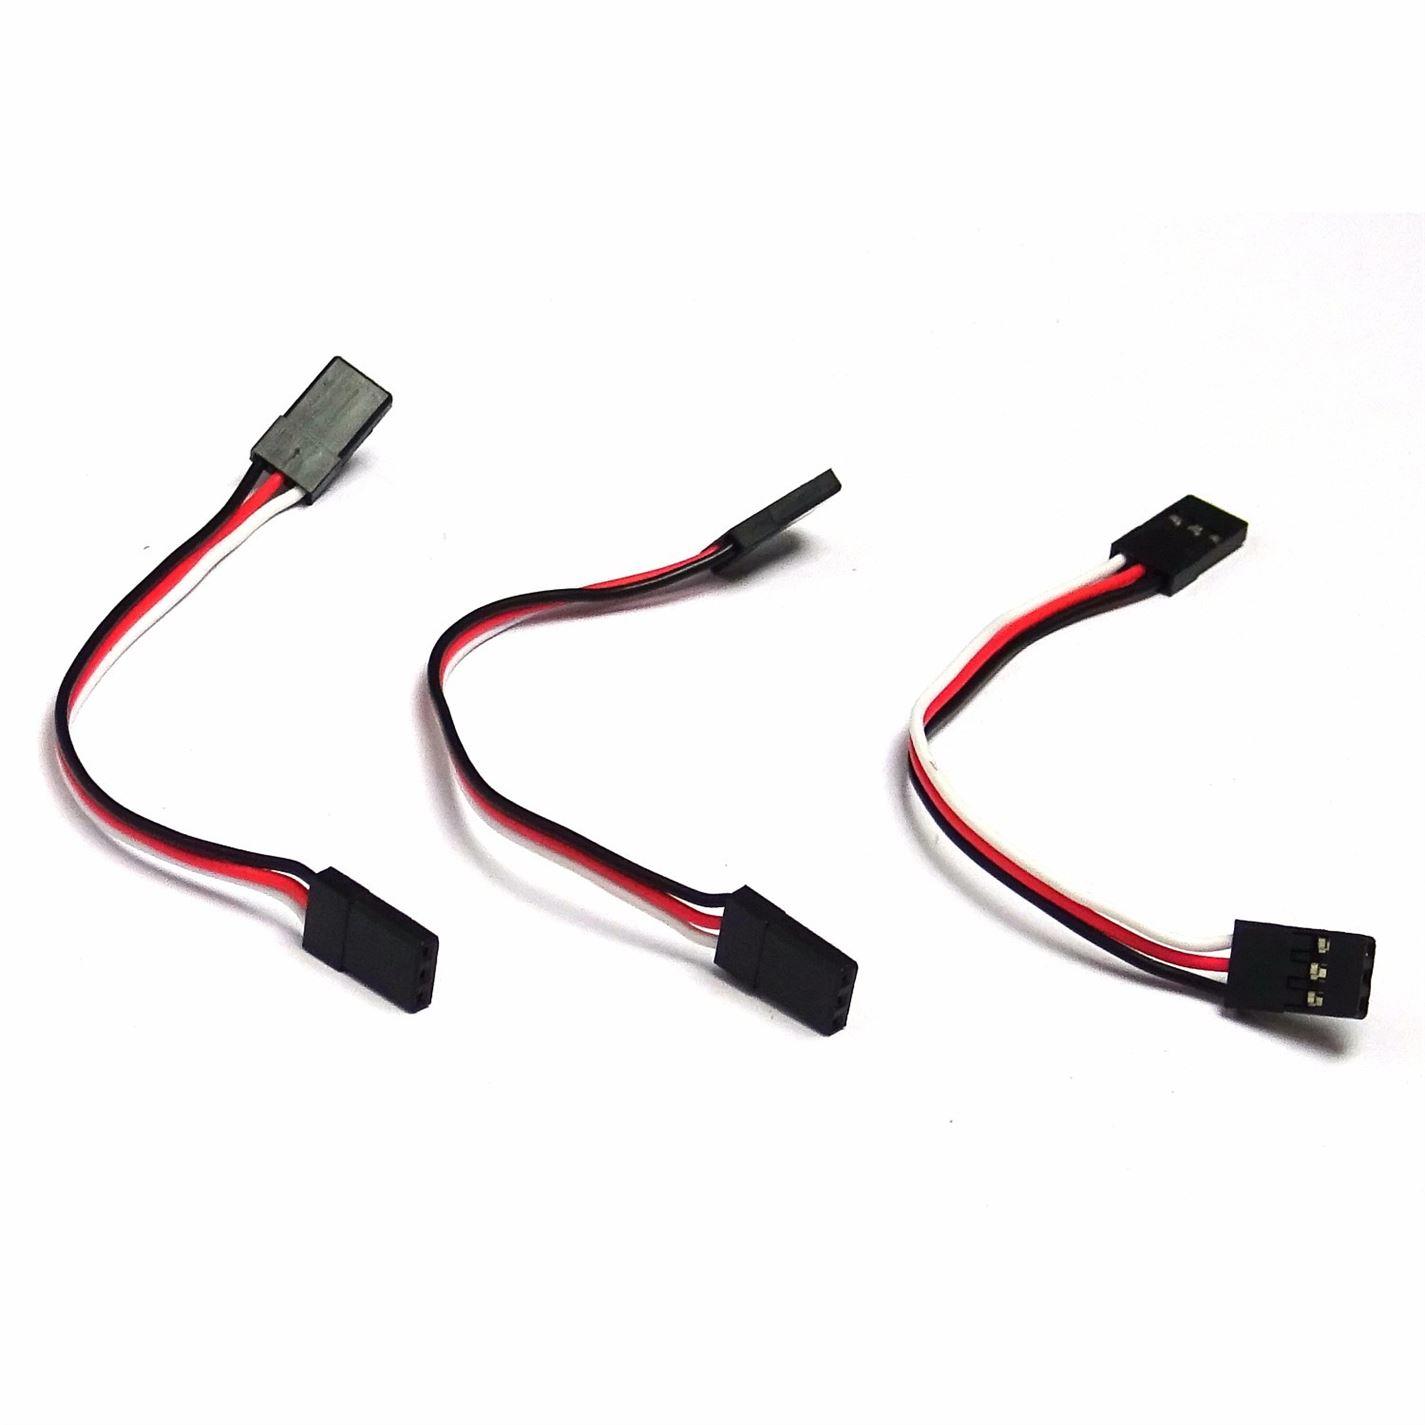 3x 100mm Servo Extension Lead Wire Cable MALE TO MALE KK MK MWC Flight Control - UK Seller